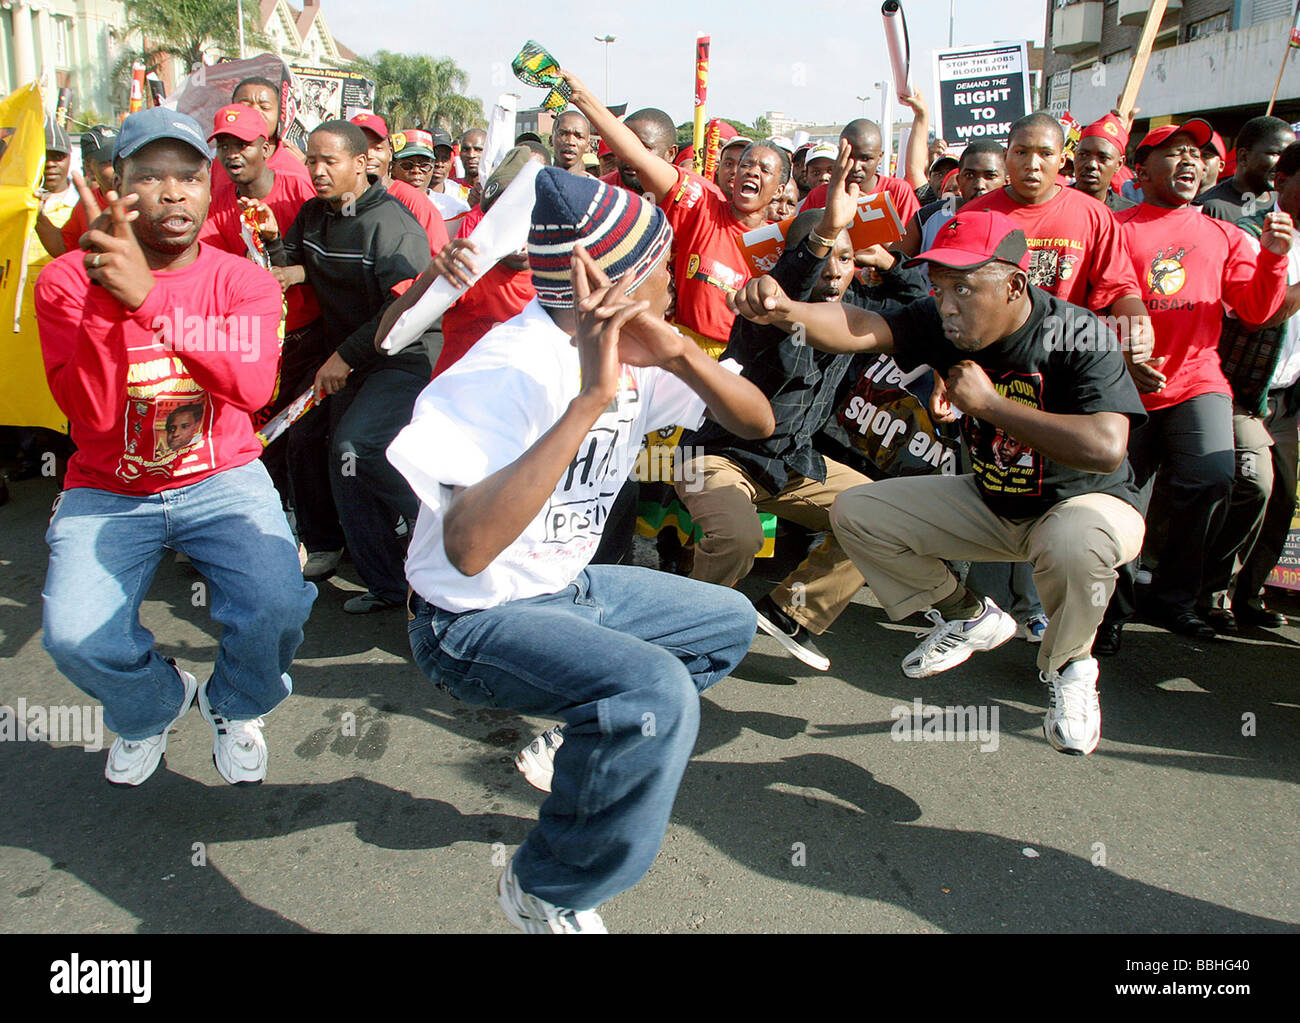 Thousands of South African workers marched through the streets of Durban as part of a one day nation wide strike called by the Stock Photo